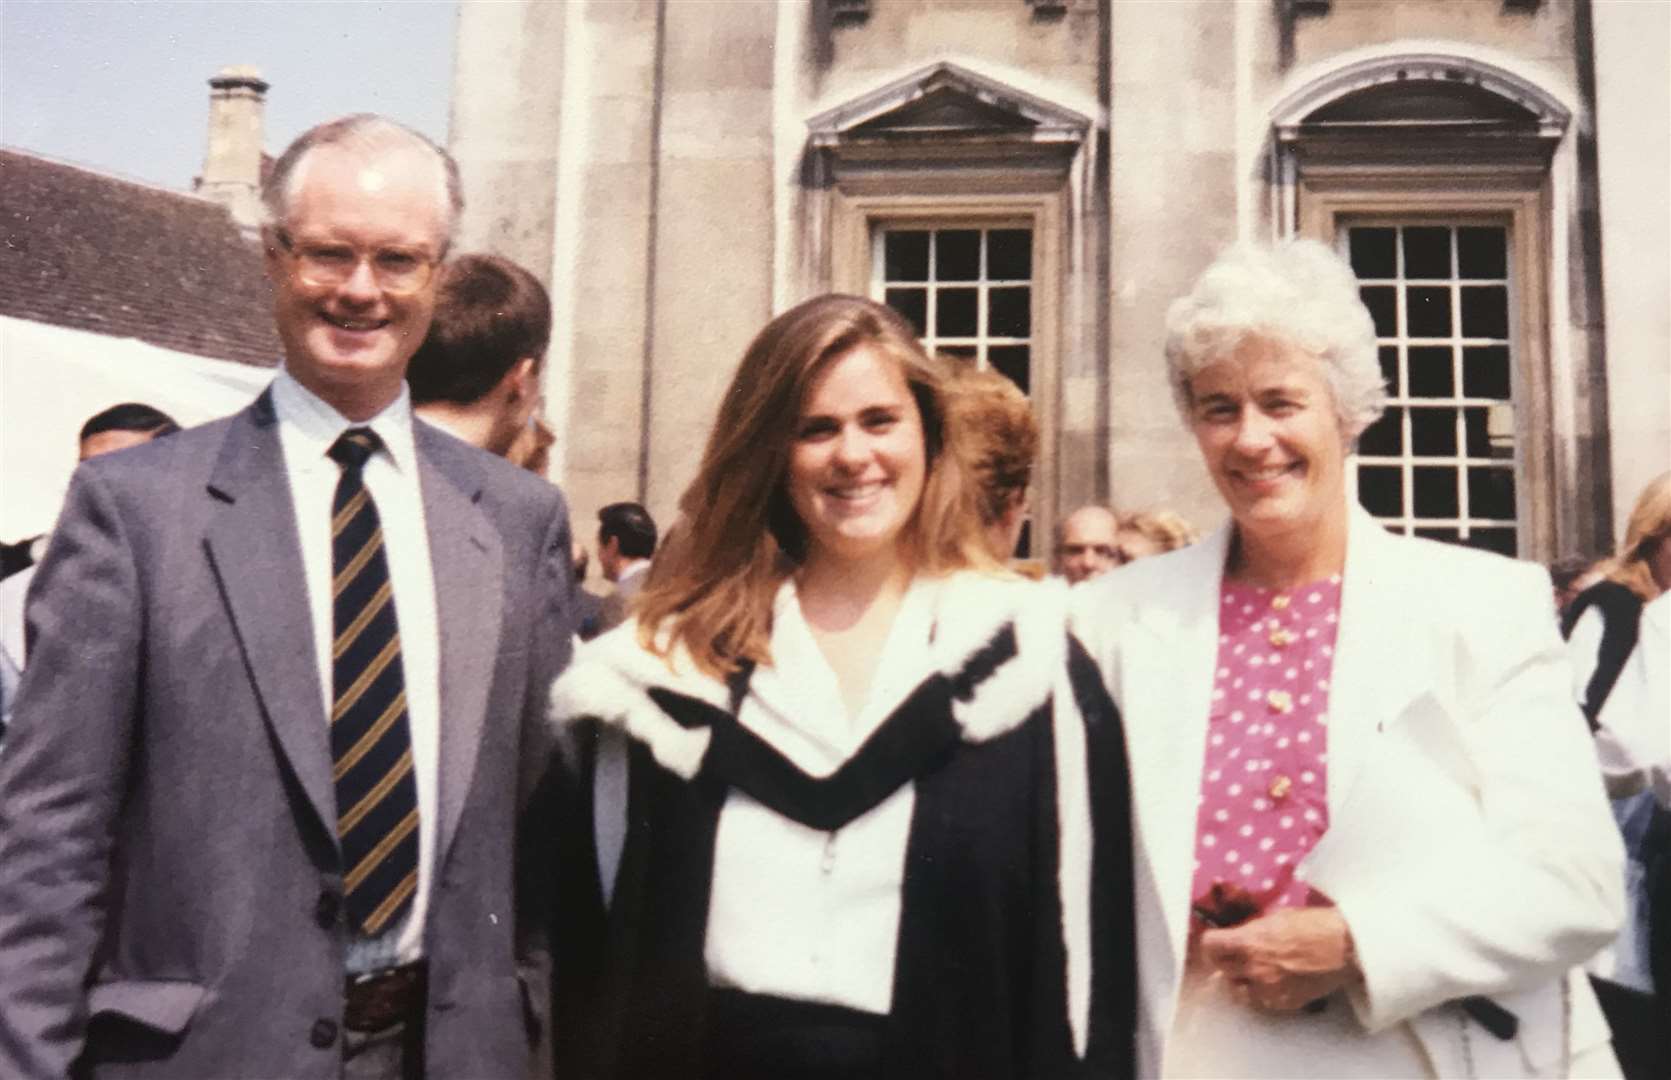 Author Anna Wilson, with father Martin and mother Gillian, at her graduation from Cambridge in 1988